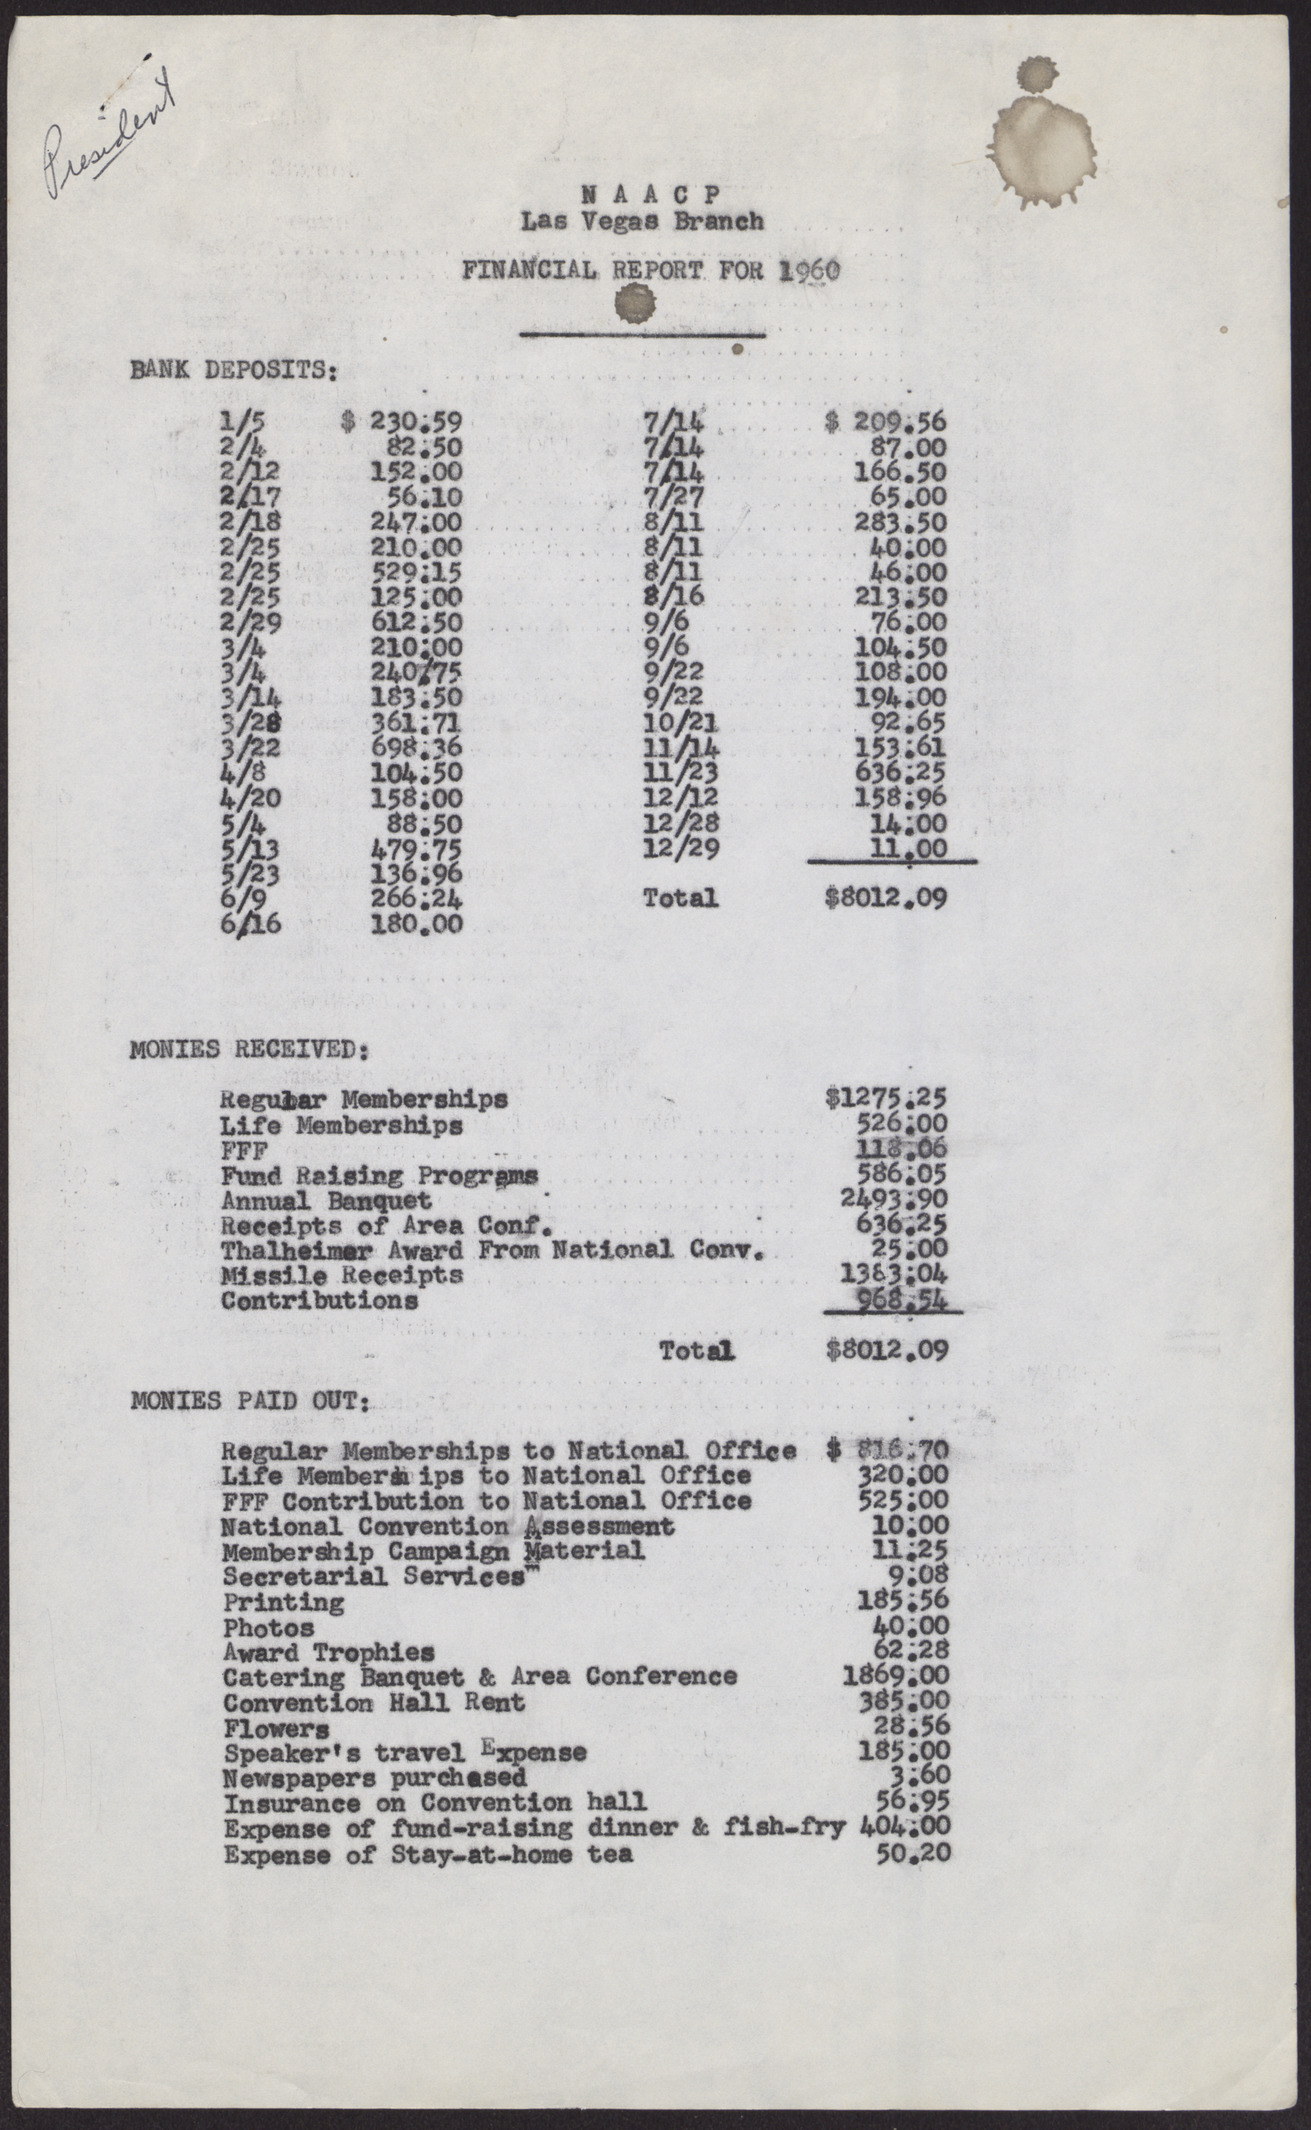 NAACP Las Vegas Branch Financial Report for 1960 (2 pages)